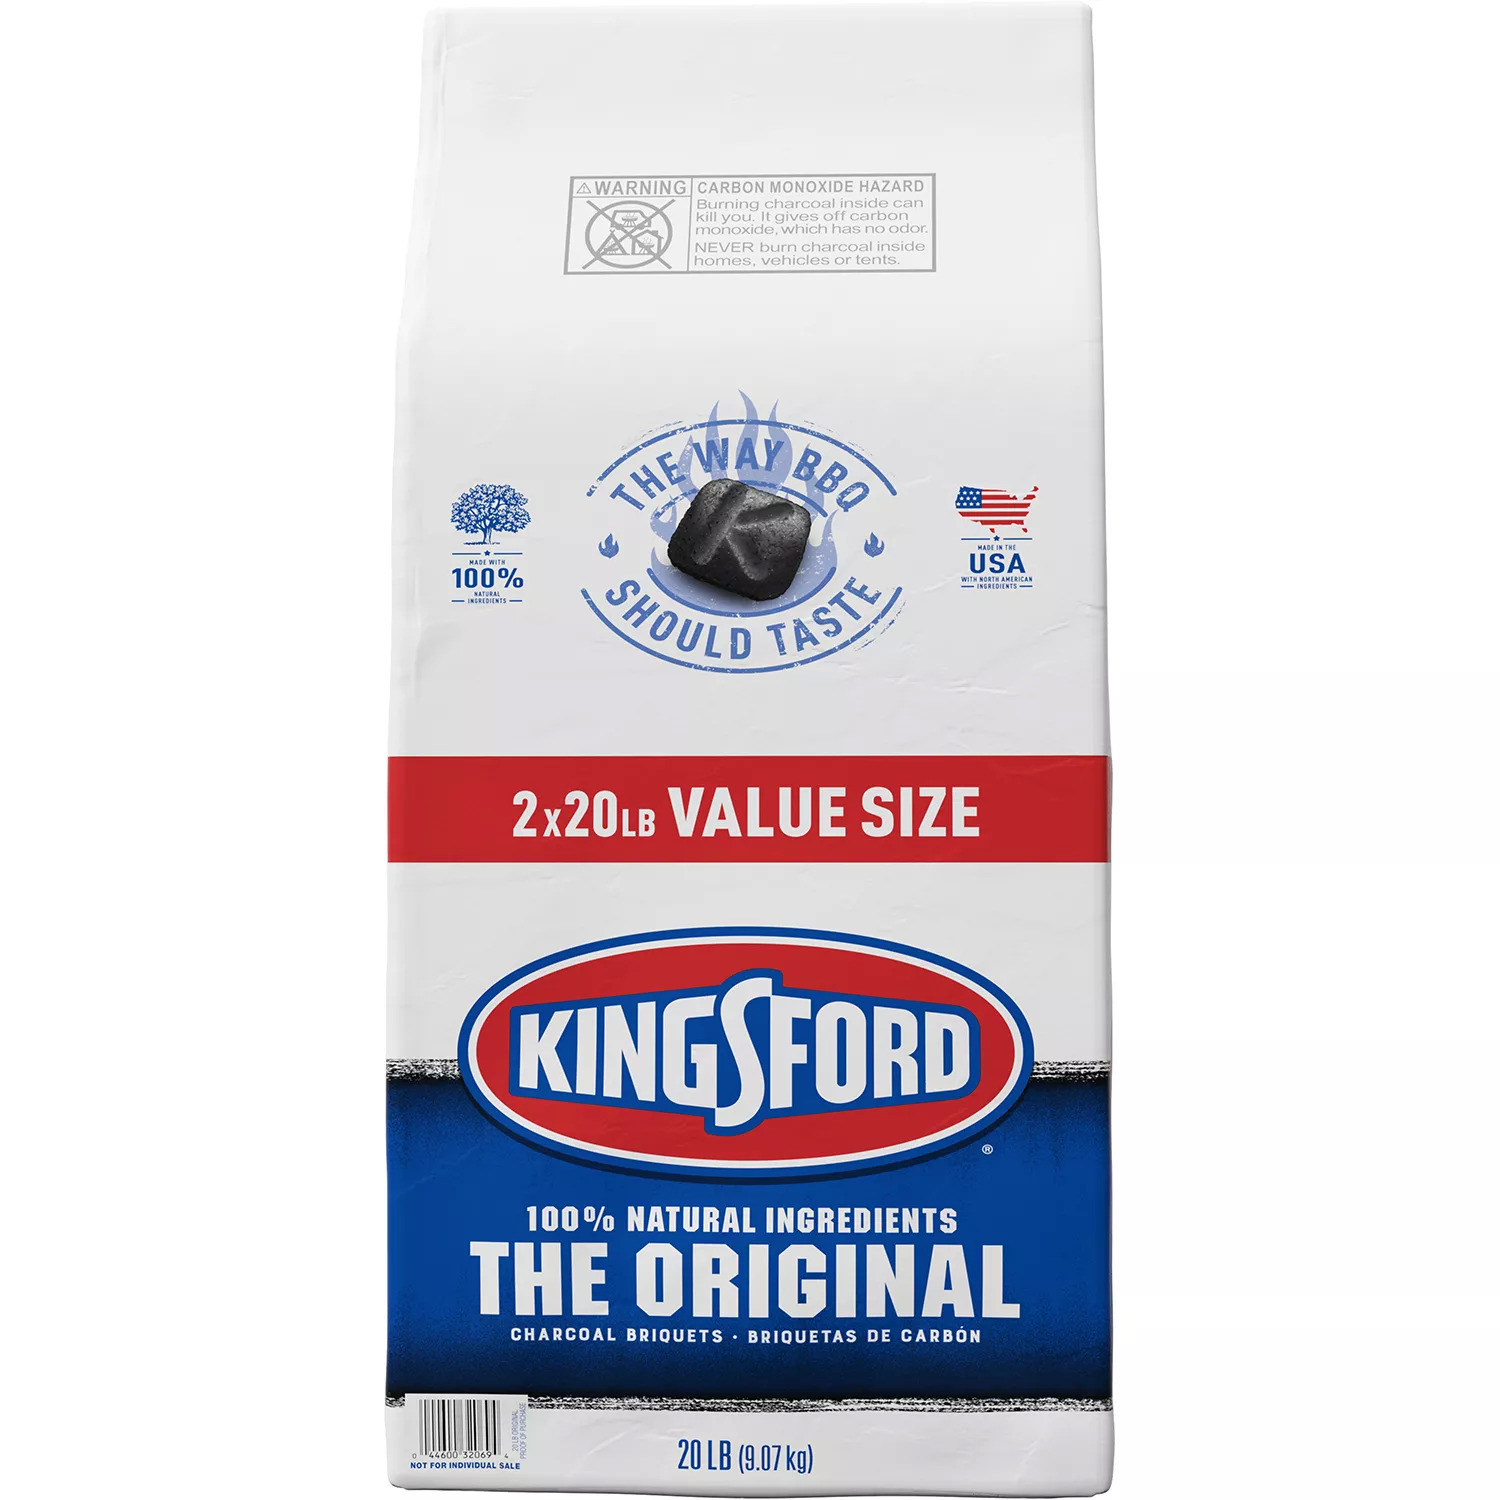 Kingsford Charcoal 2x20 Lb. bags for $20